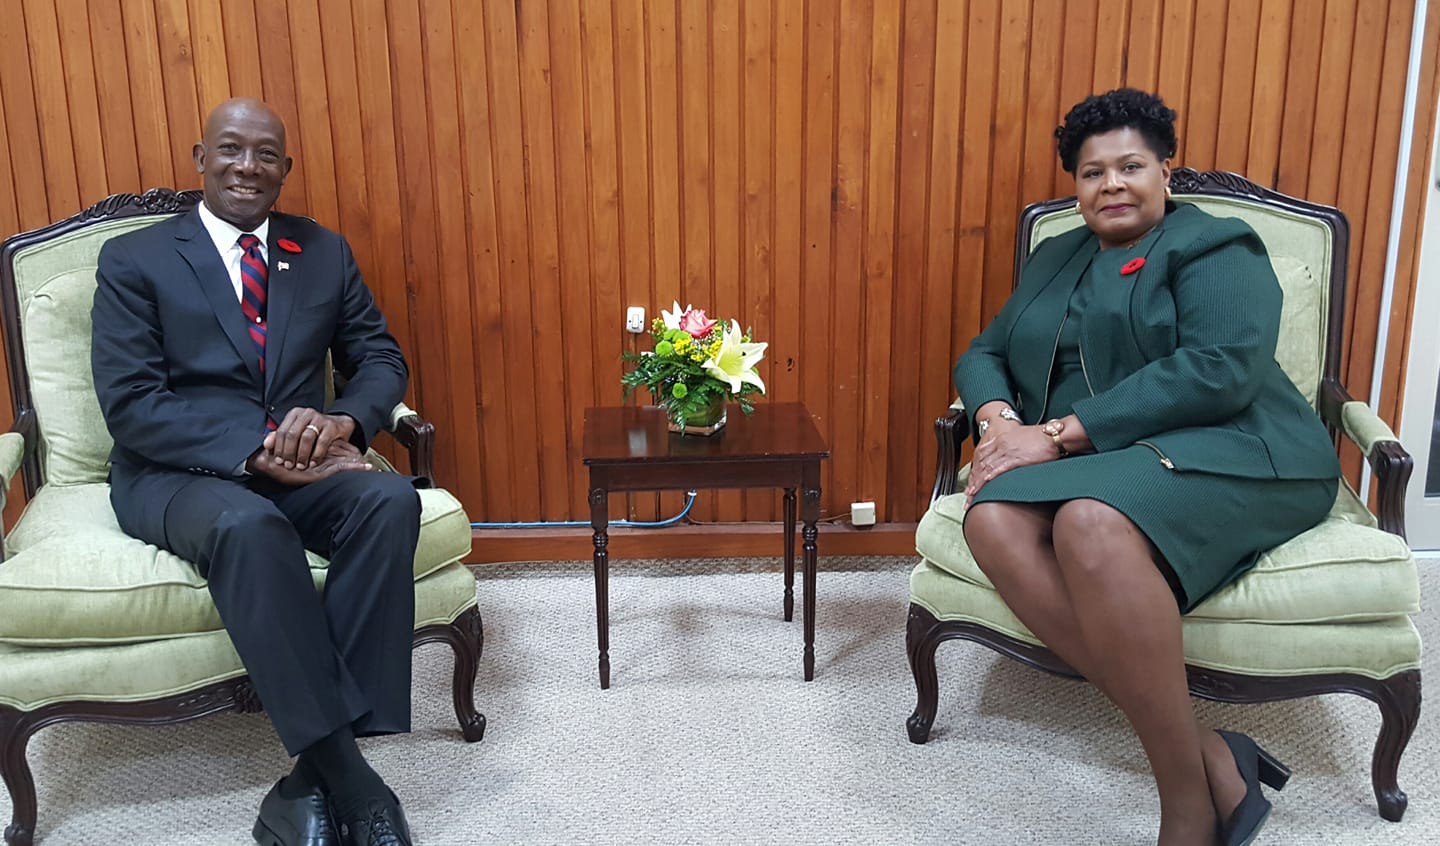 President told to “come clean” over meeting with Rowley or resign